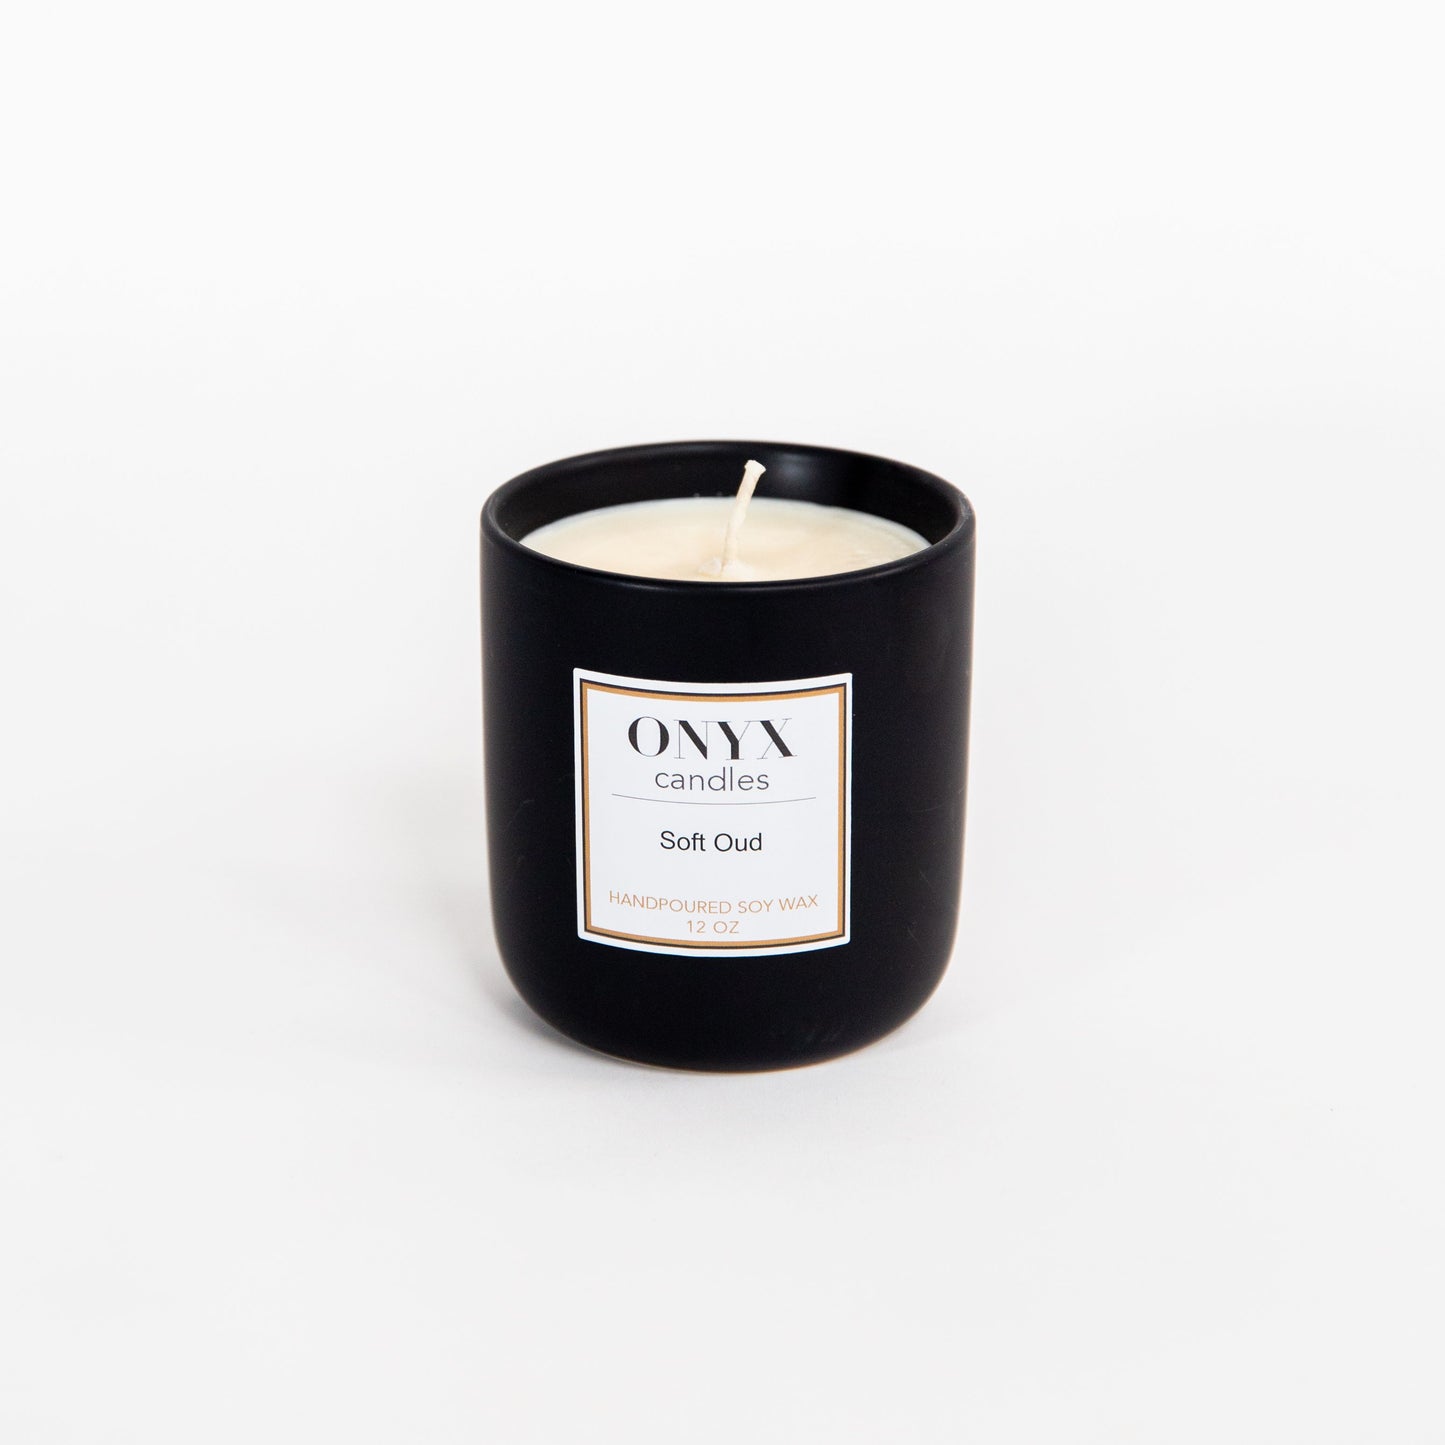 12 oz matte black ceramic candle in the scent Soft Oud